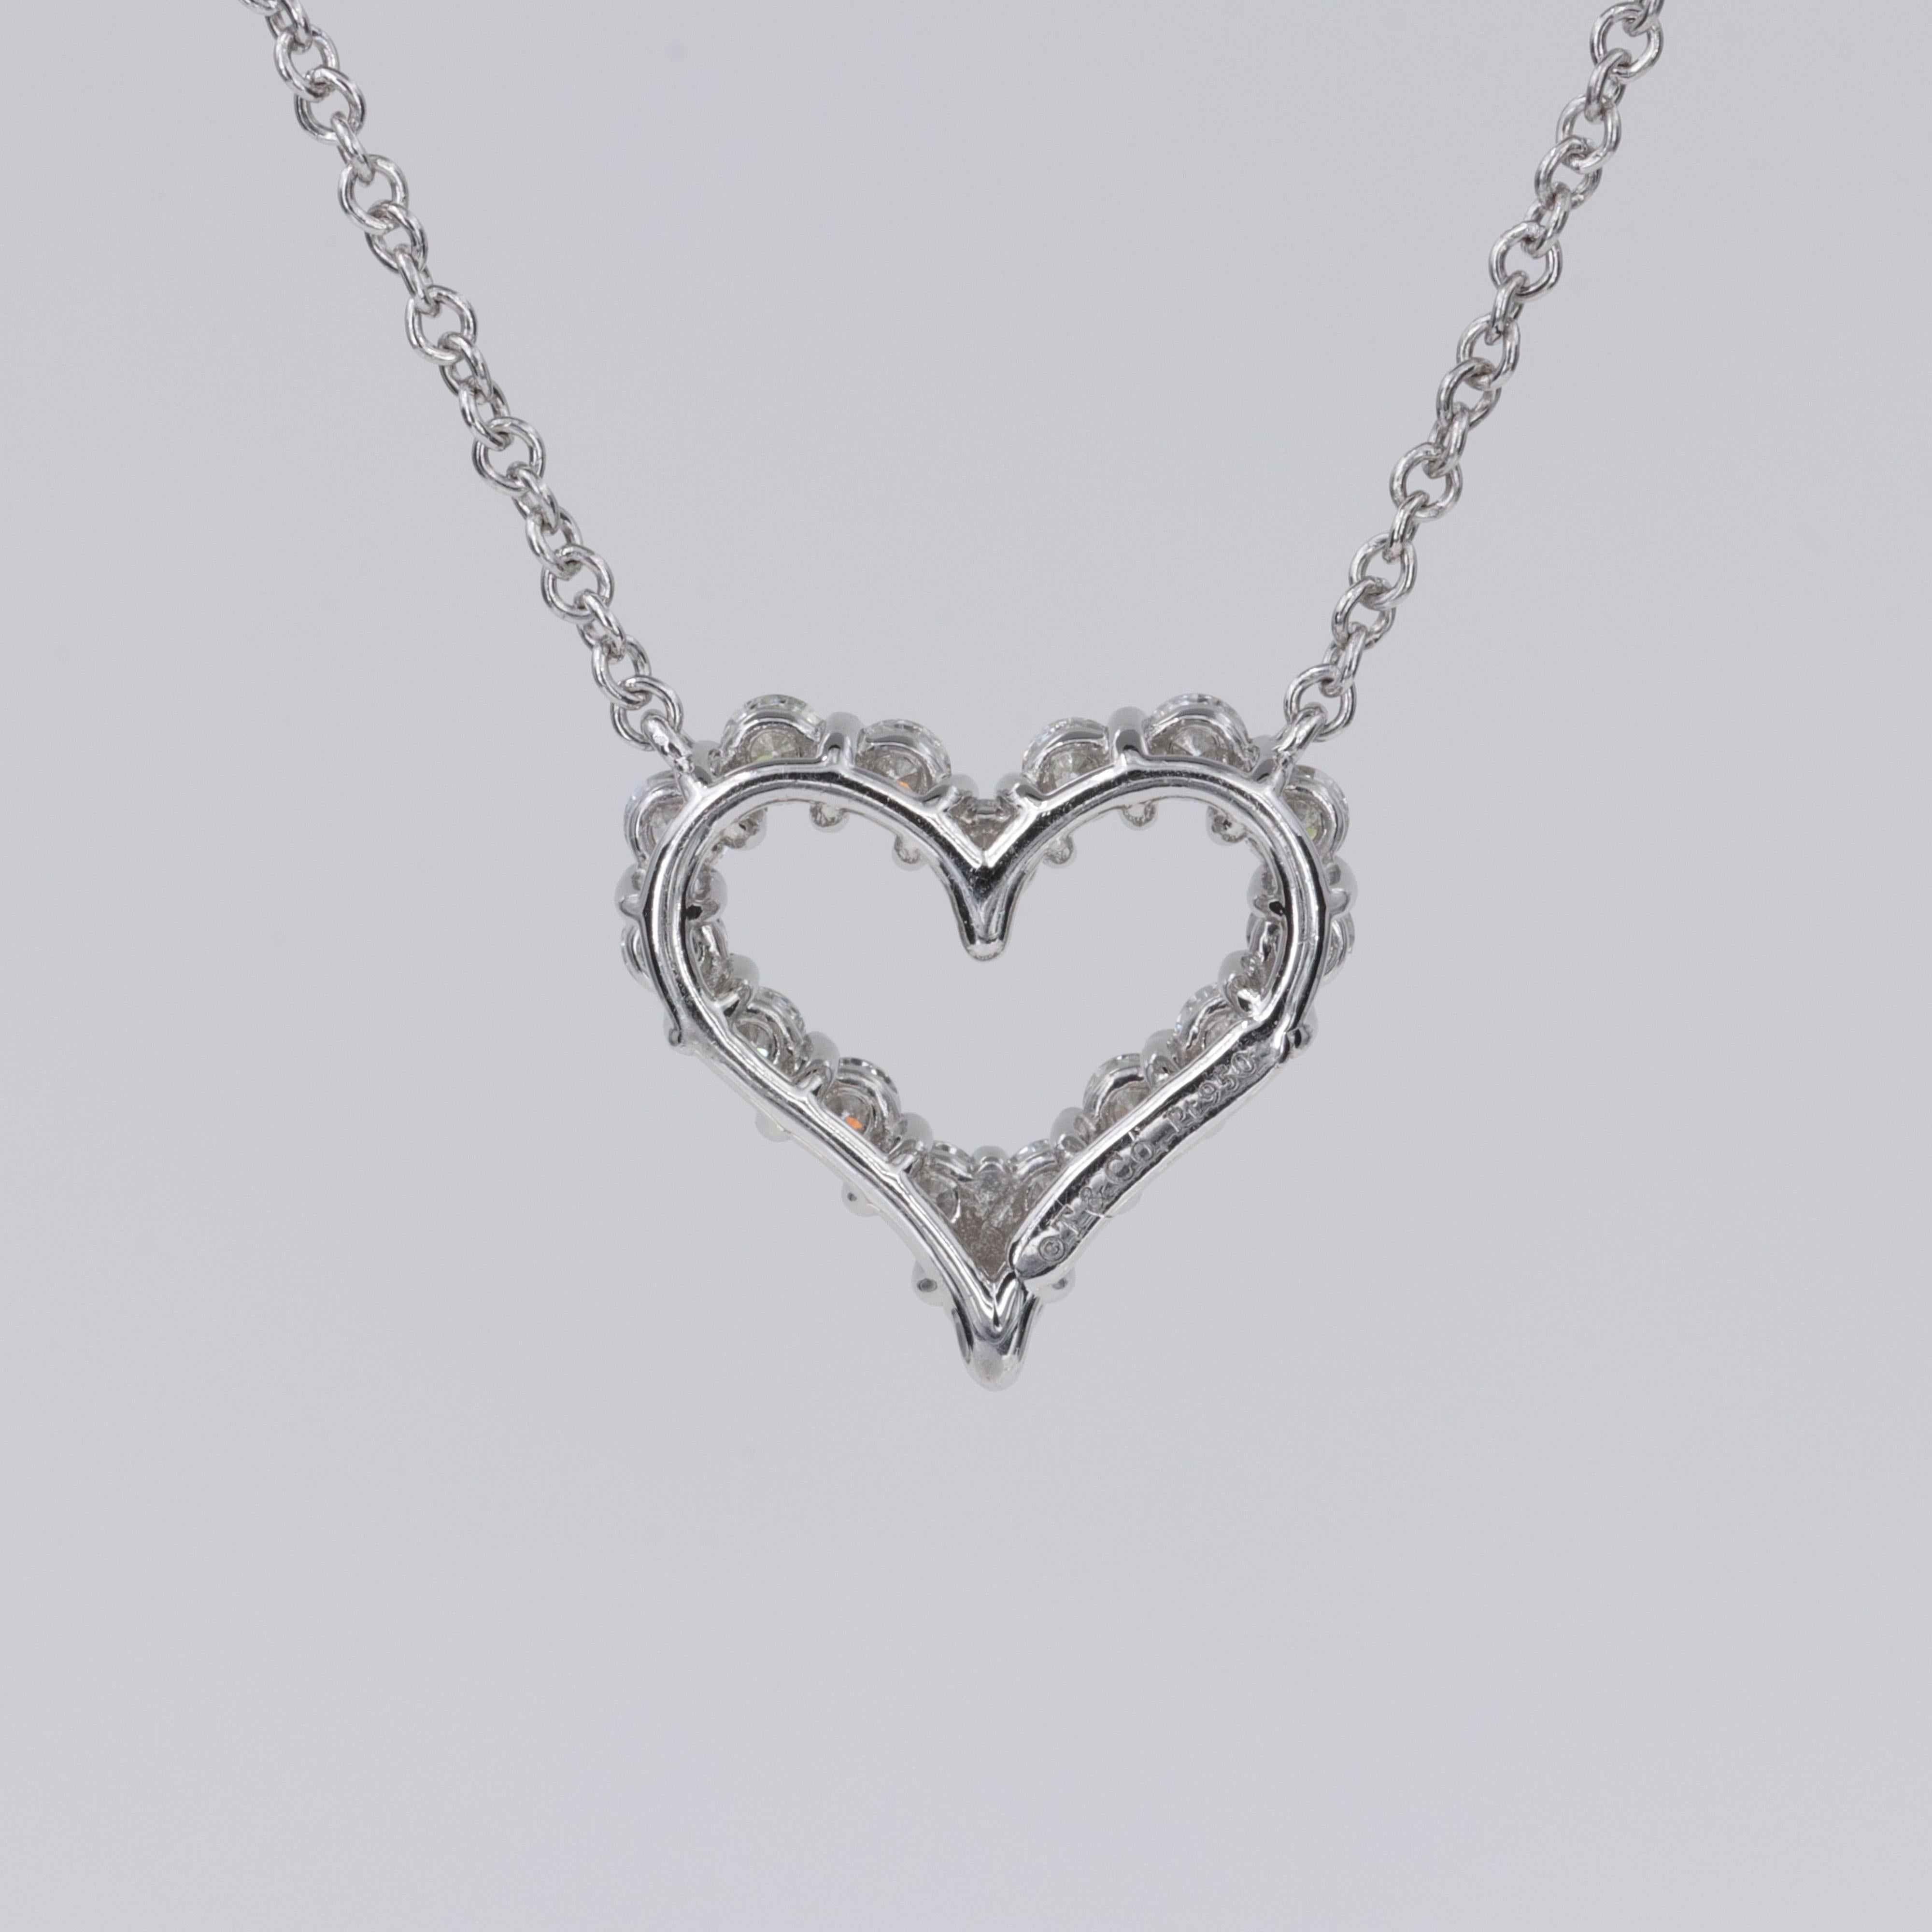 Tiffany & Co. Platinum and Diamond Heart Pendant Necklace

The perfect little heart necklace for layering or worn by itself. 

.25 Carats of fine quality round brilliant cut diamonds set in platinum. 

Chain length:  16'

Heart Dimensions: 11mm H x